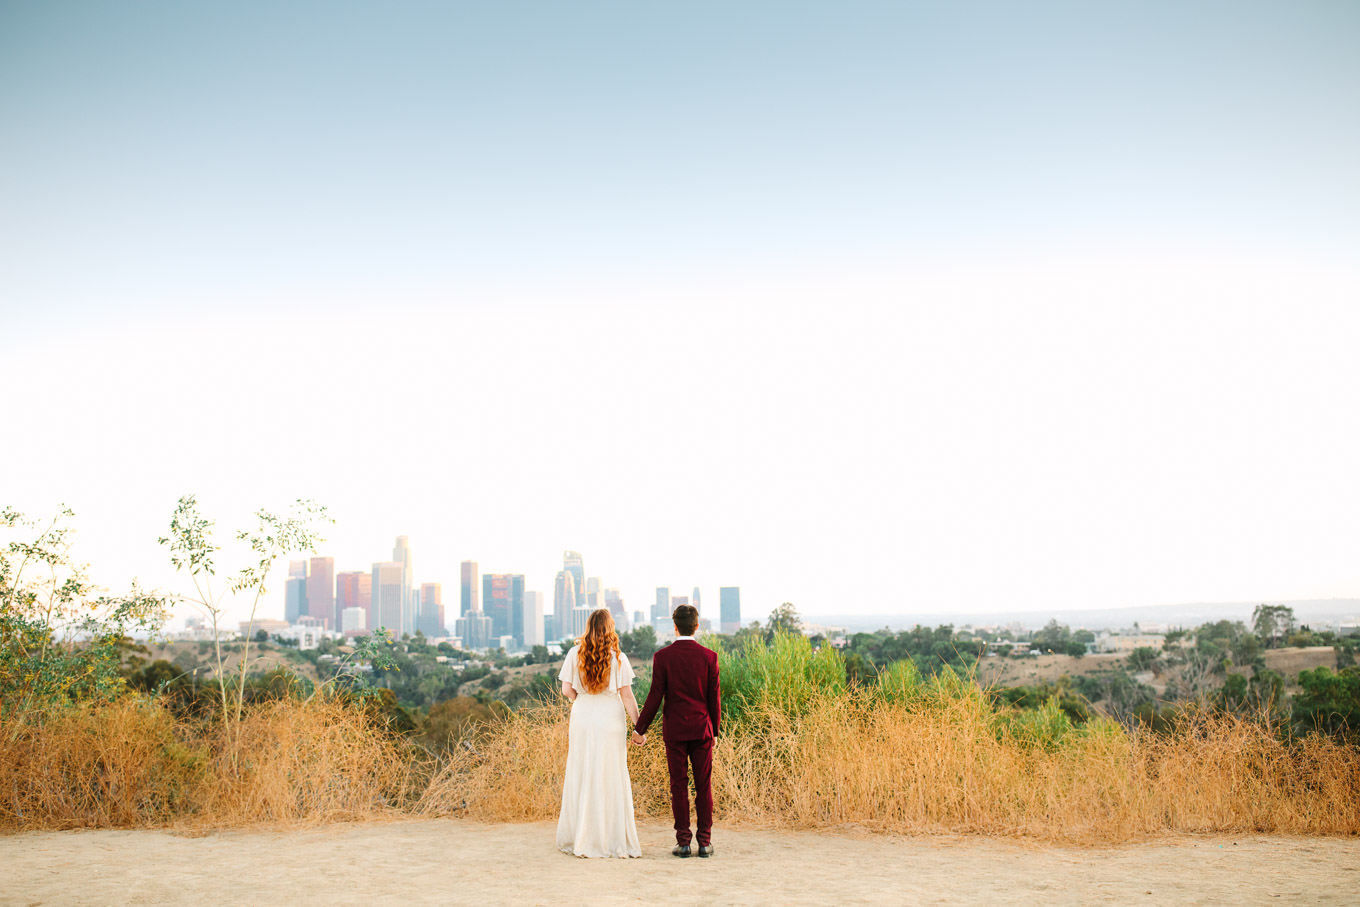 Couple in front of LA skyline | Los Angeles Elysian Park Elopement | Colorful and elevated wedding photography for fun-loving couples in Southern California | #LosAngelesElopement #elopement #LAarboretum #LAskyline #elopementphotos   Source: Mary Costa Photography | Los Angeles